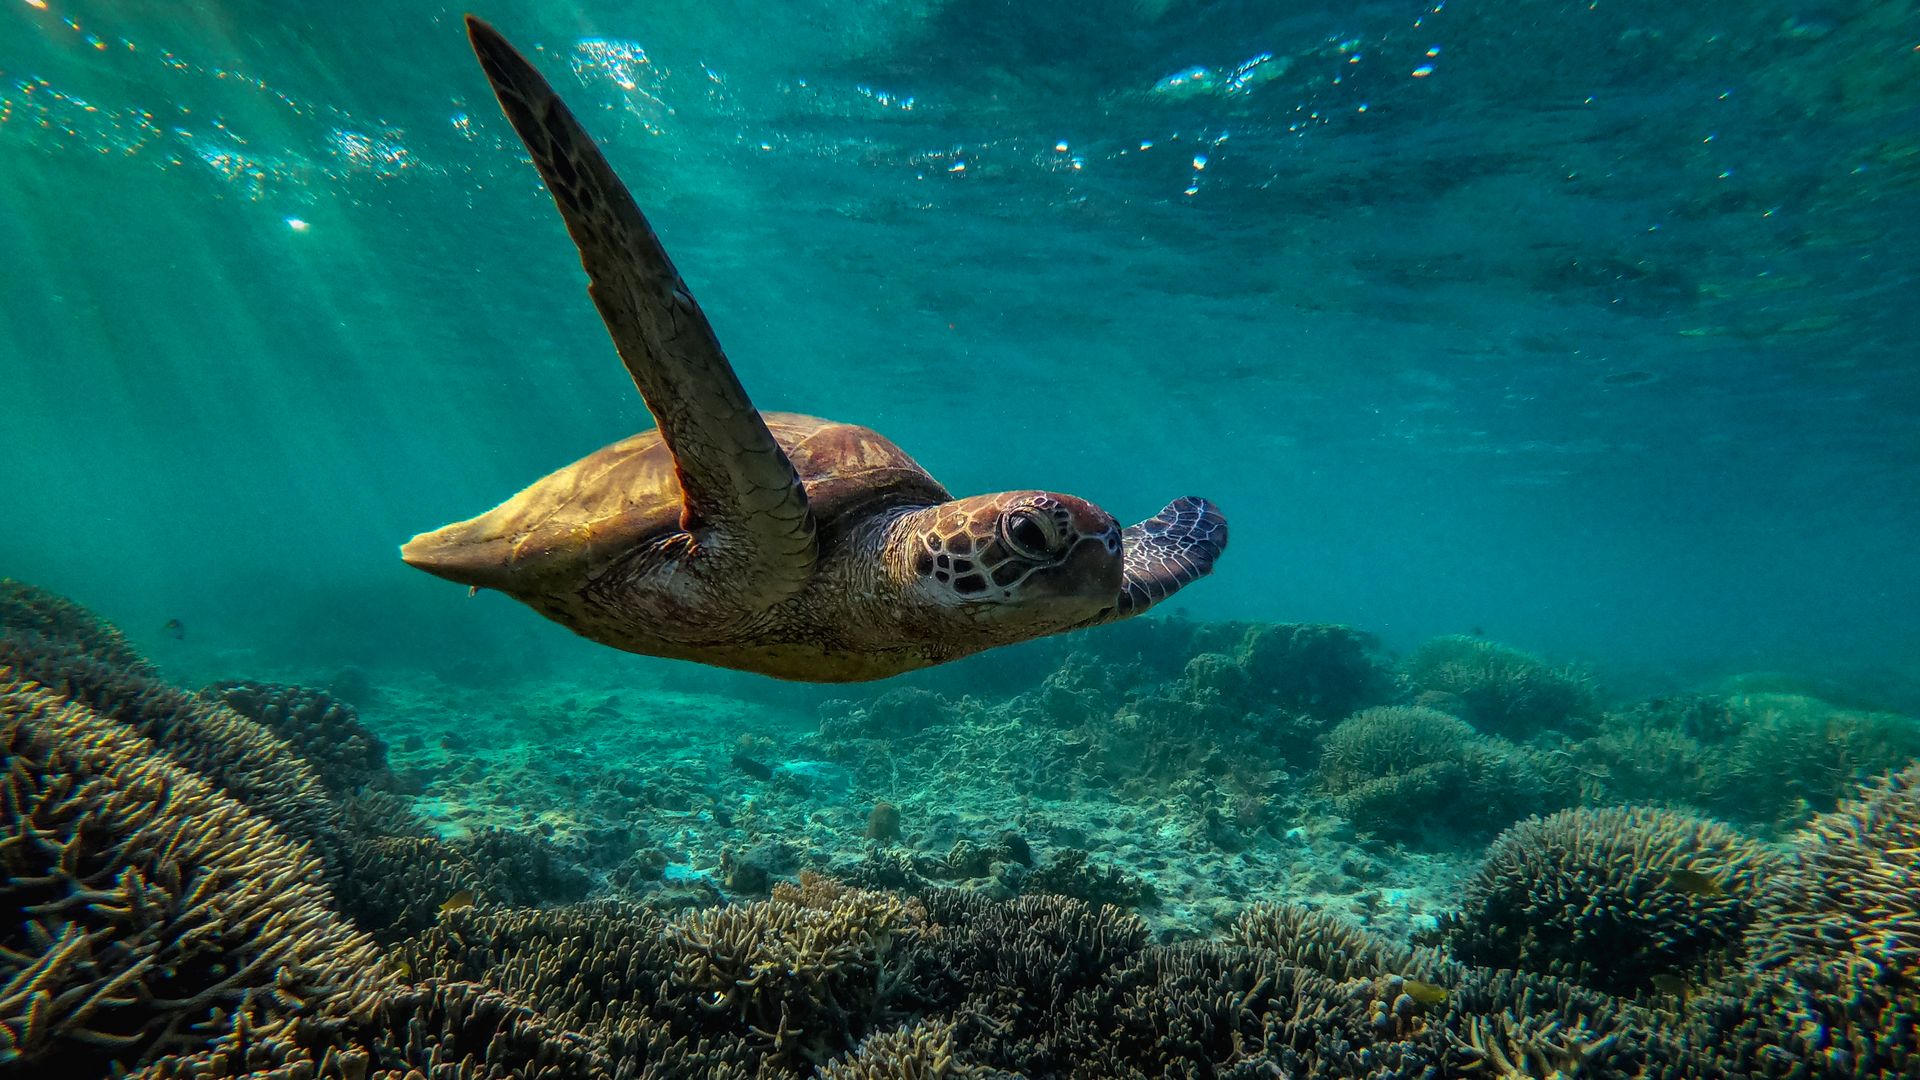  A green sea turtle is flourishing among the corals at lady Elliot island